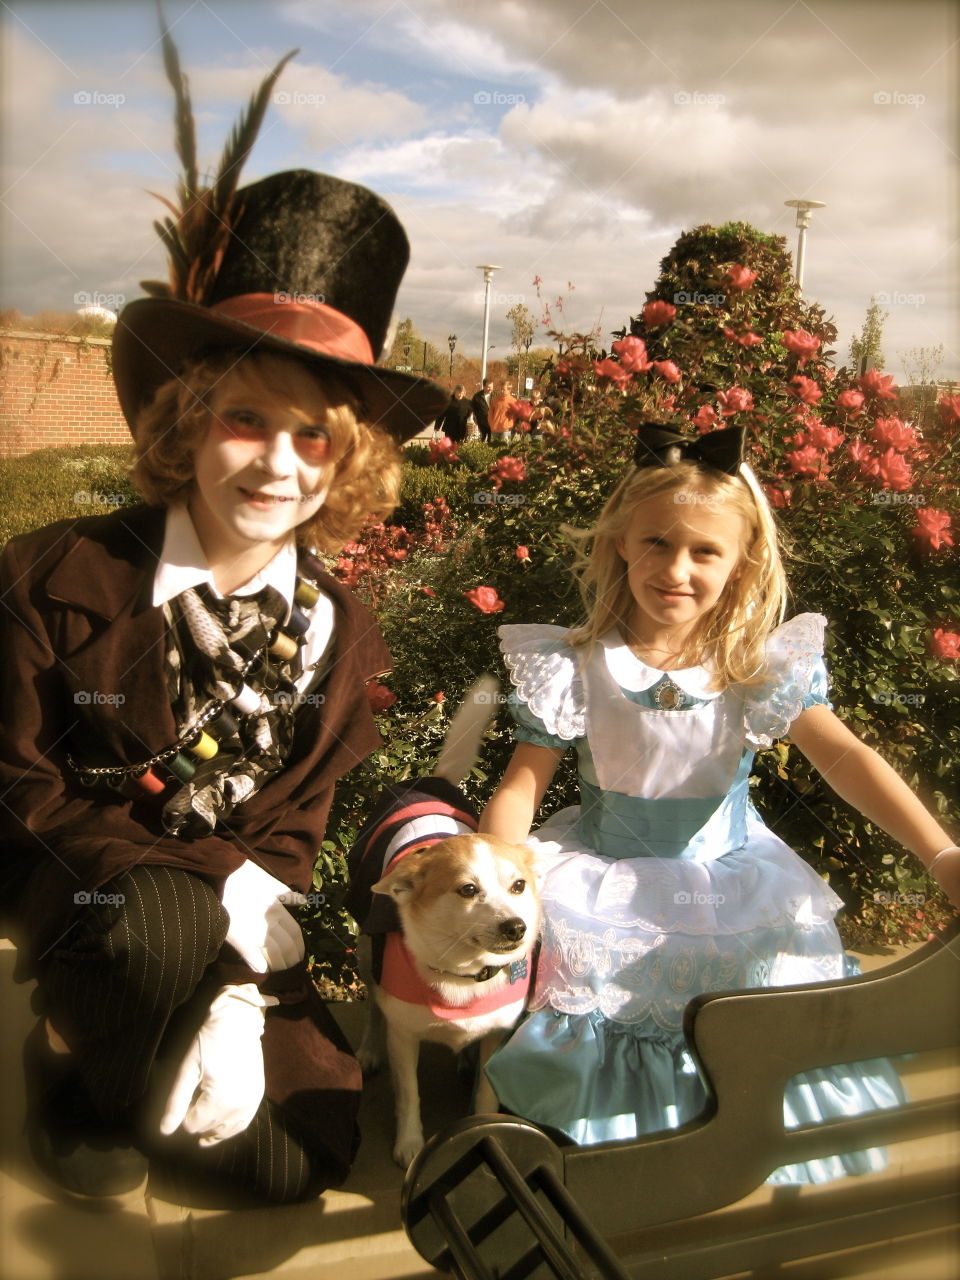 We're all mad here. Family Halloween pic